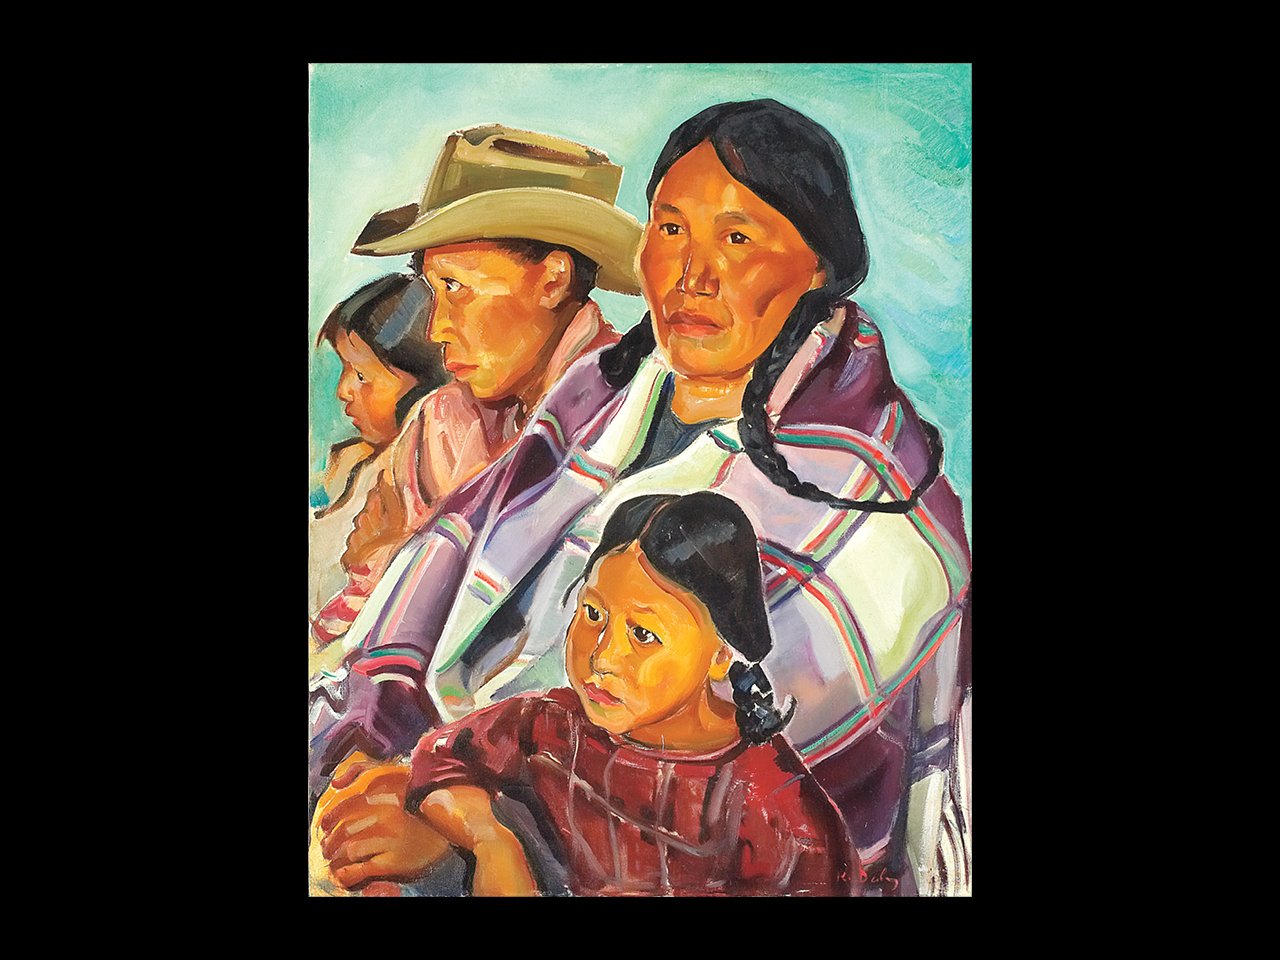 A photo of the painting "Chief Sitting Eagle's Family," four members of an Indigenous family